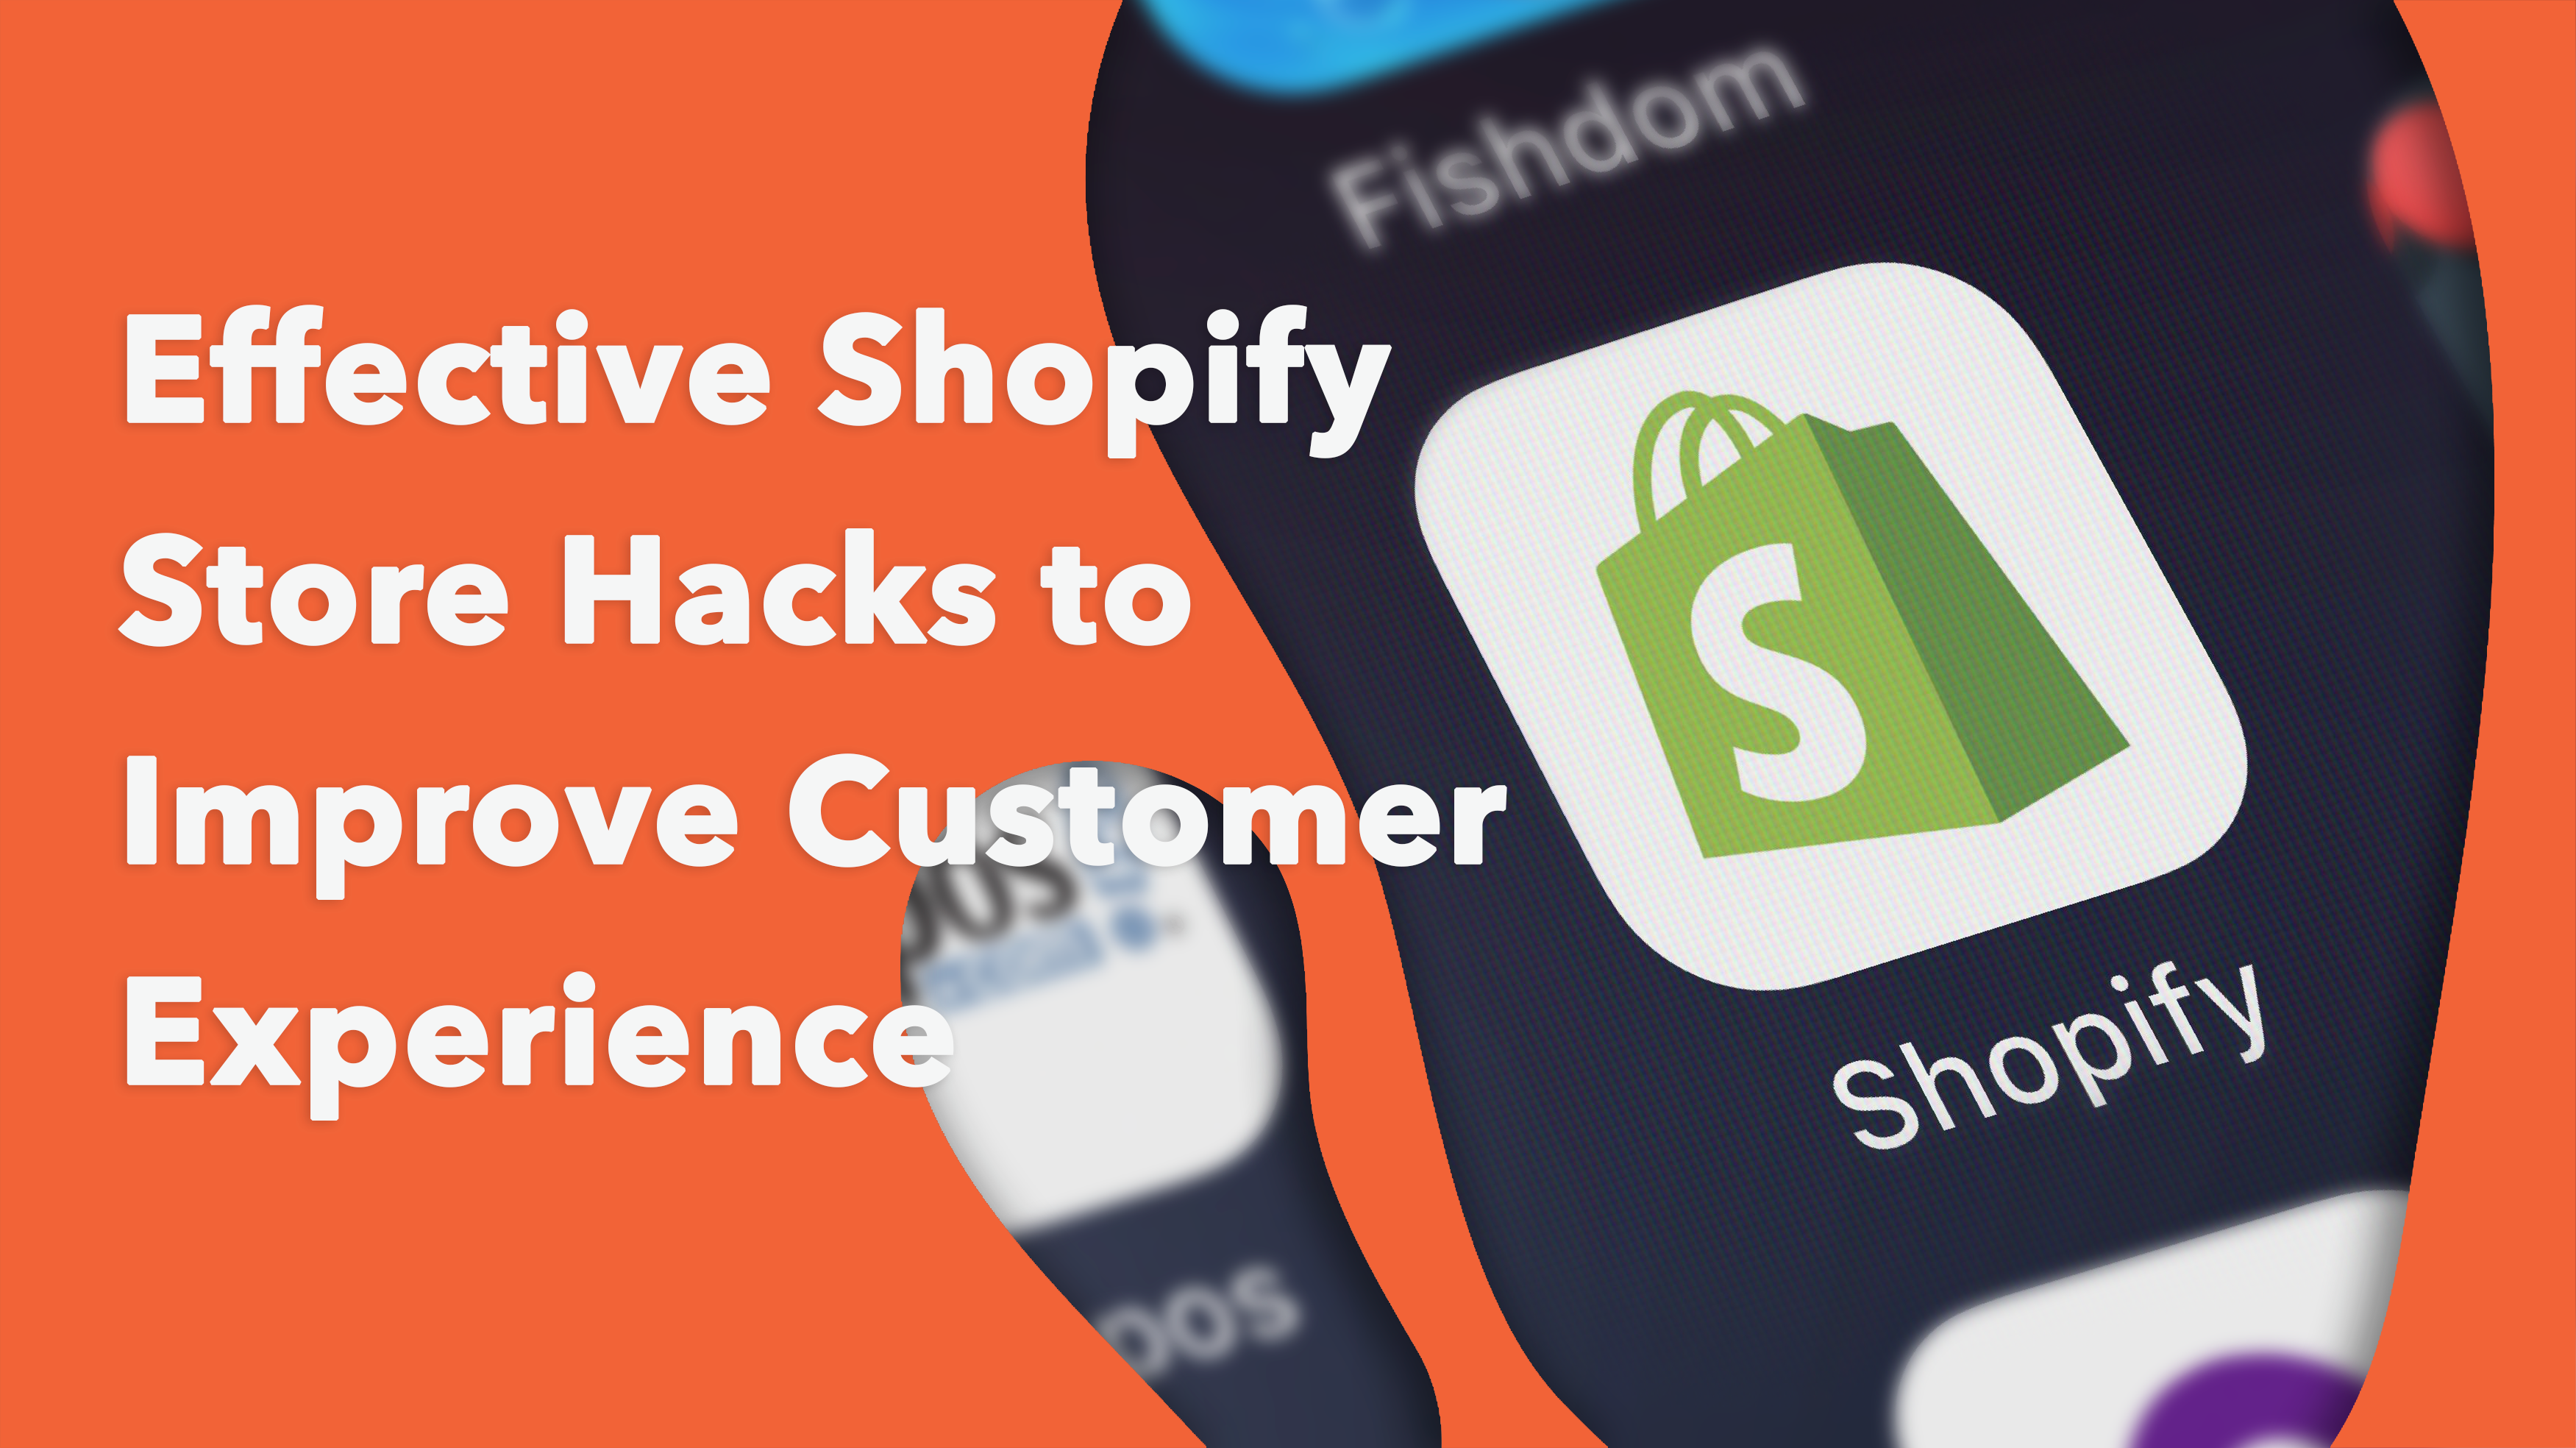 Effective Shopify Store Hacks to Improve Customer Experience